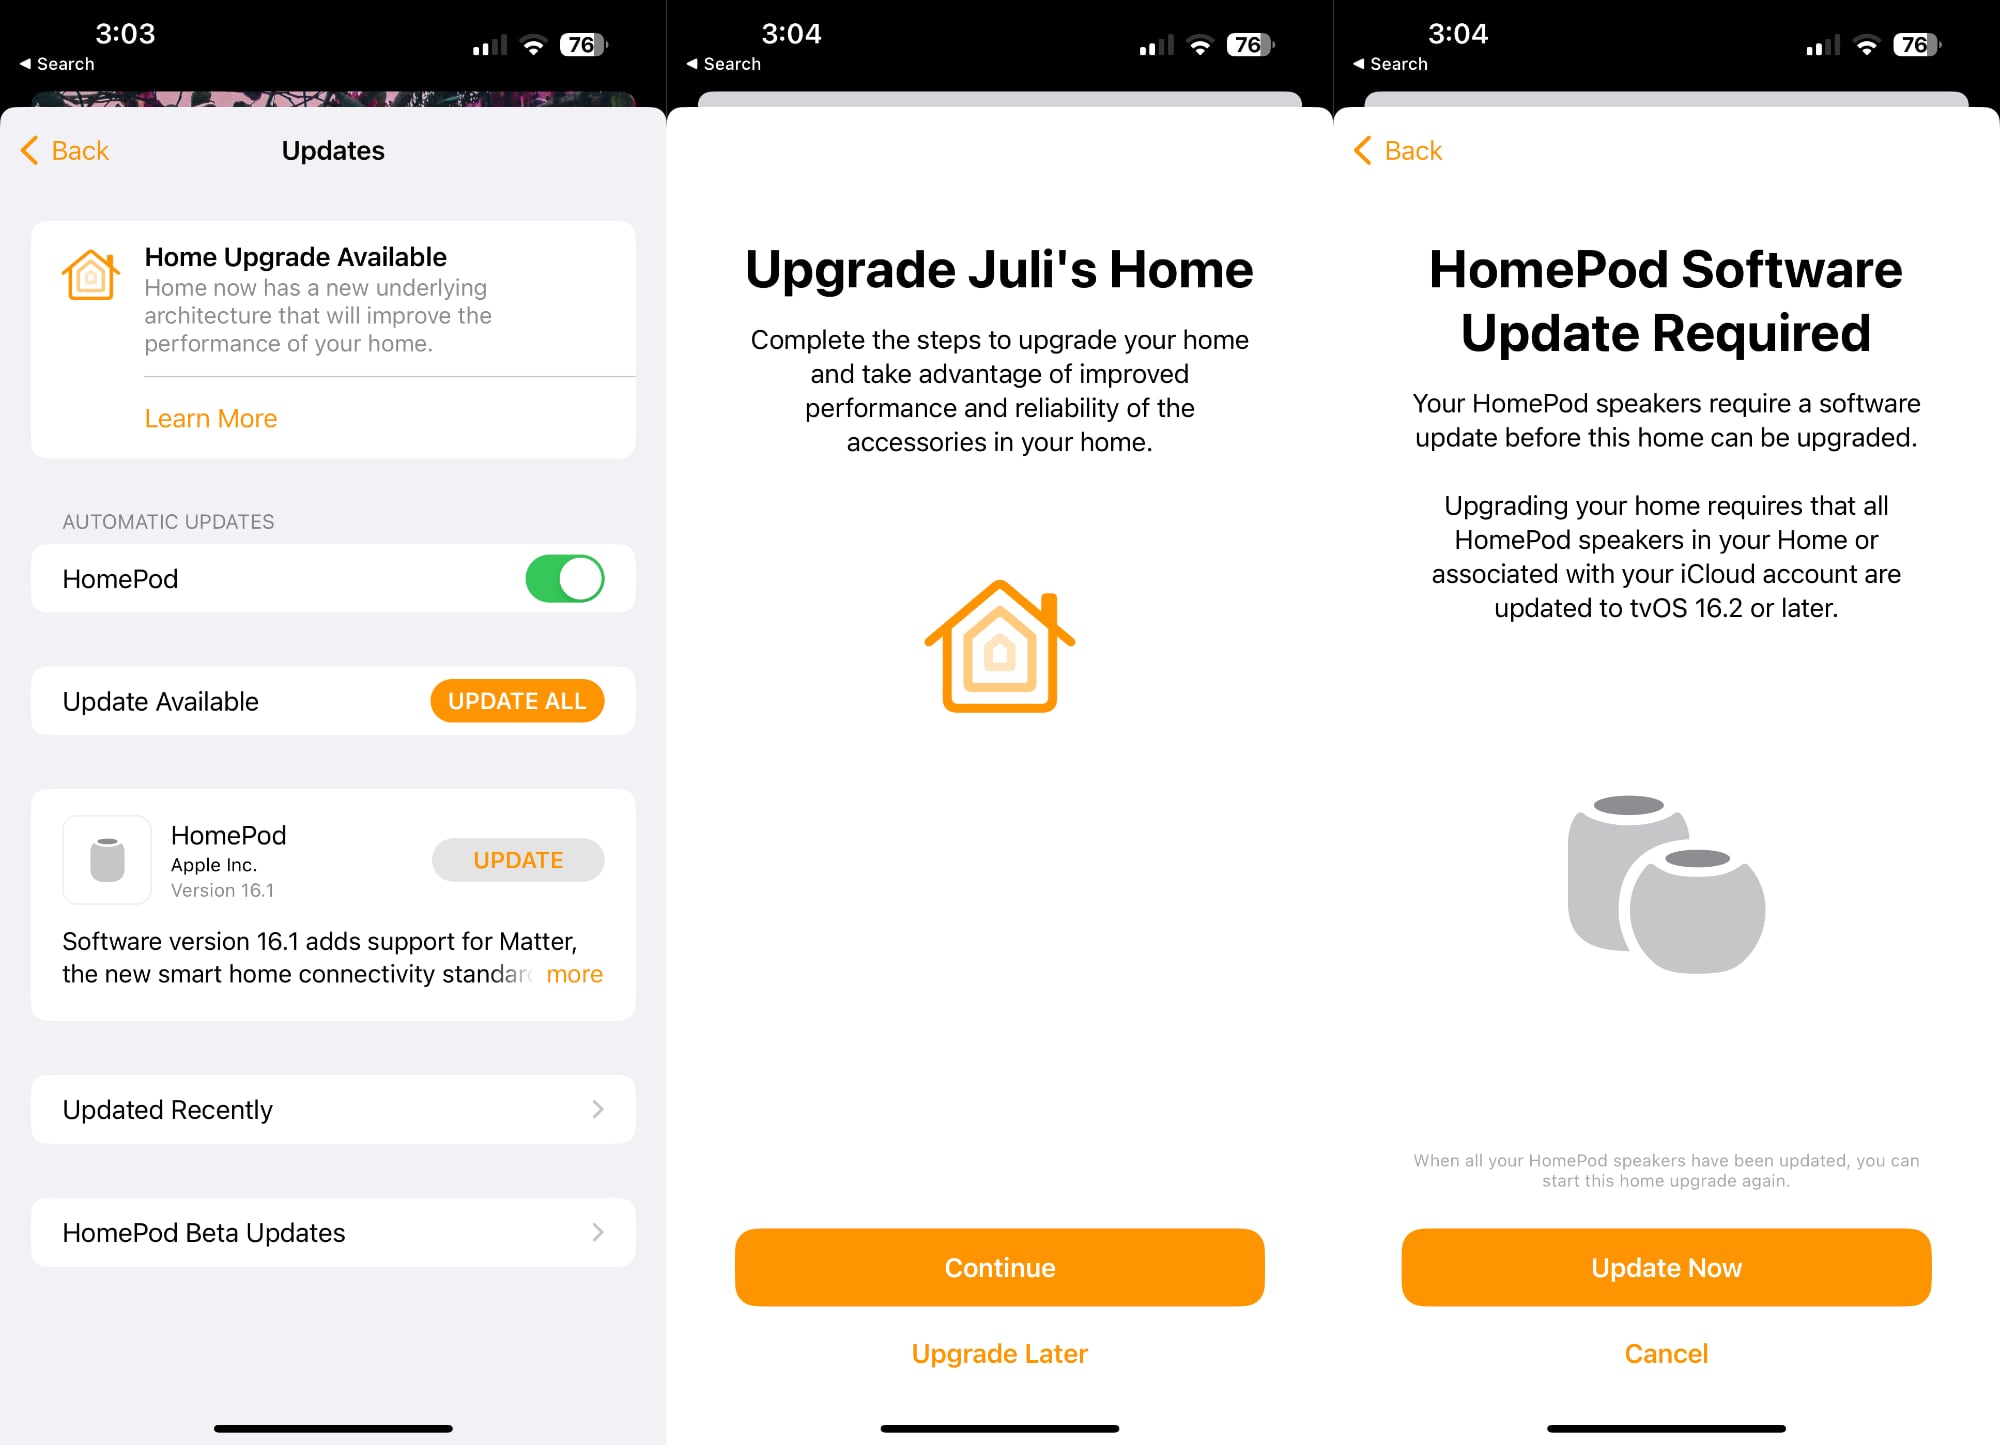 Apple Pulls iOS 16.2 Option to Upgrade to New Home Architecture